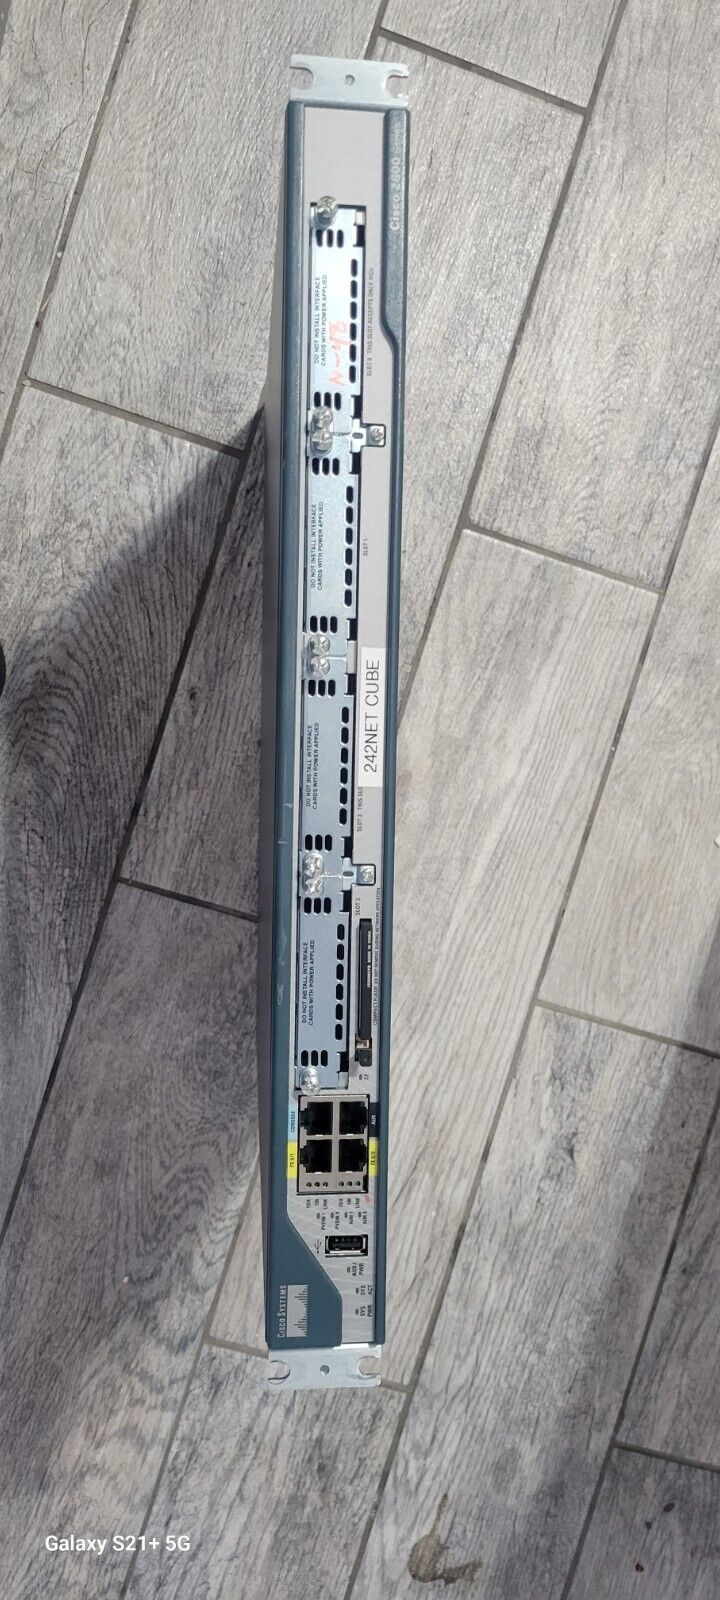 Cisco 2801 Integrated Services Router tested no power supply included